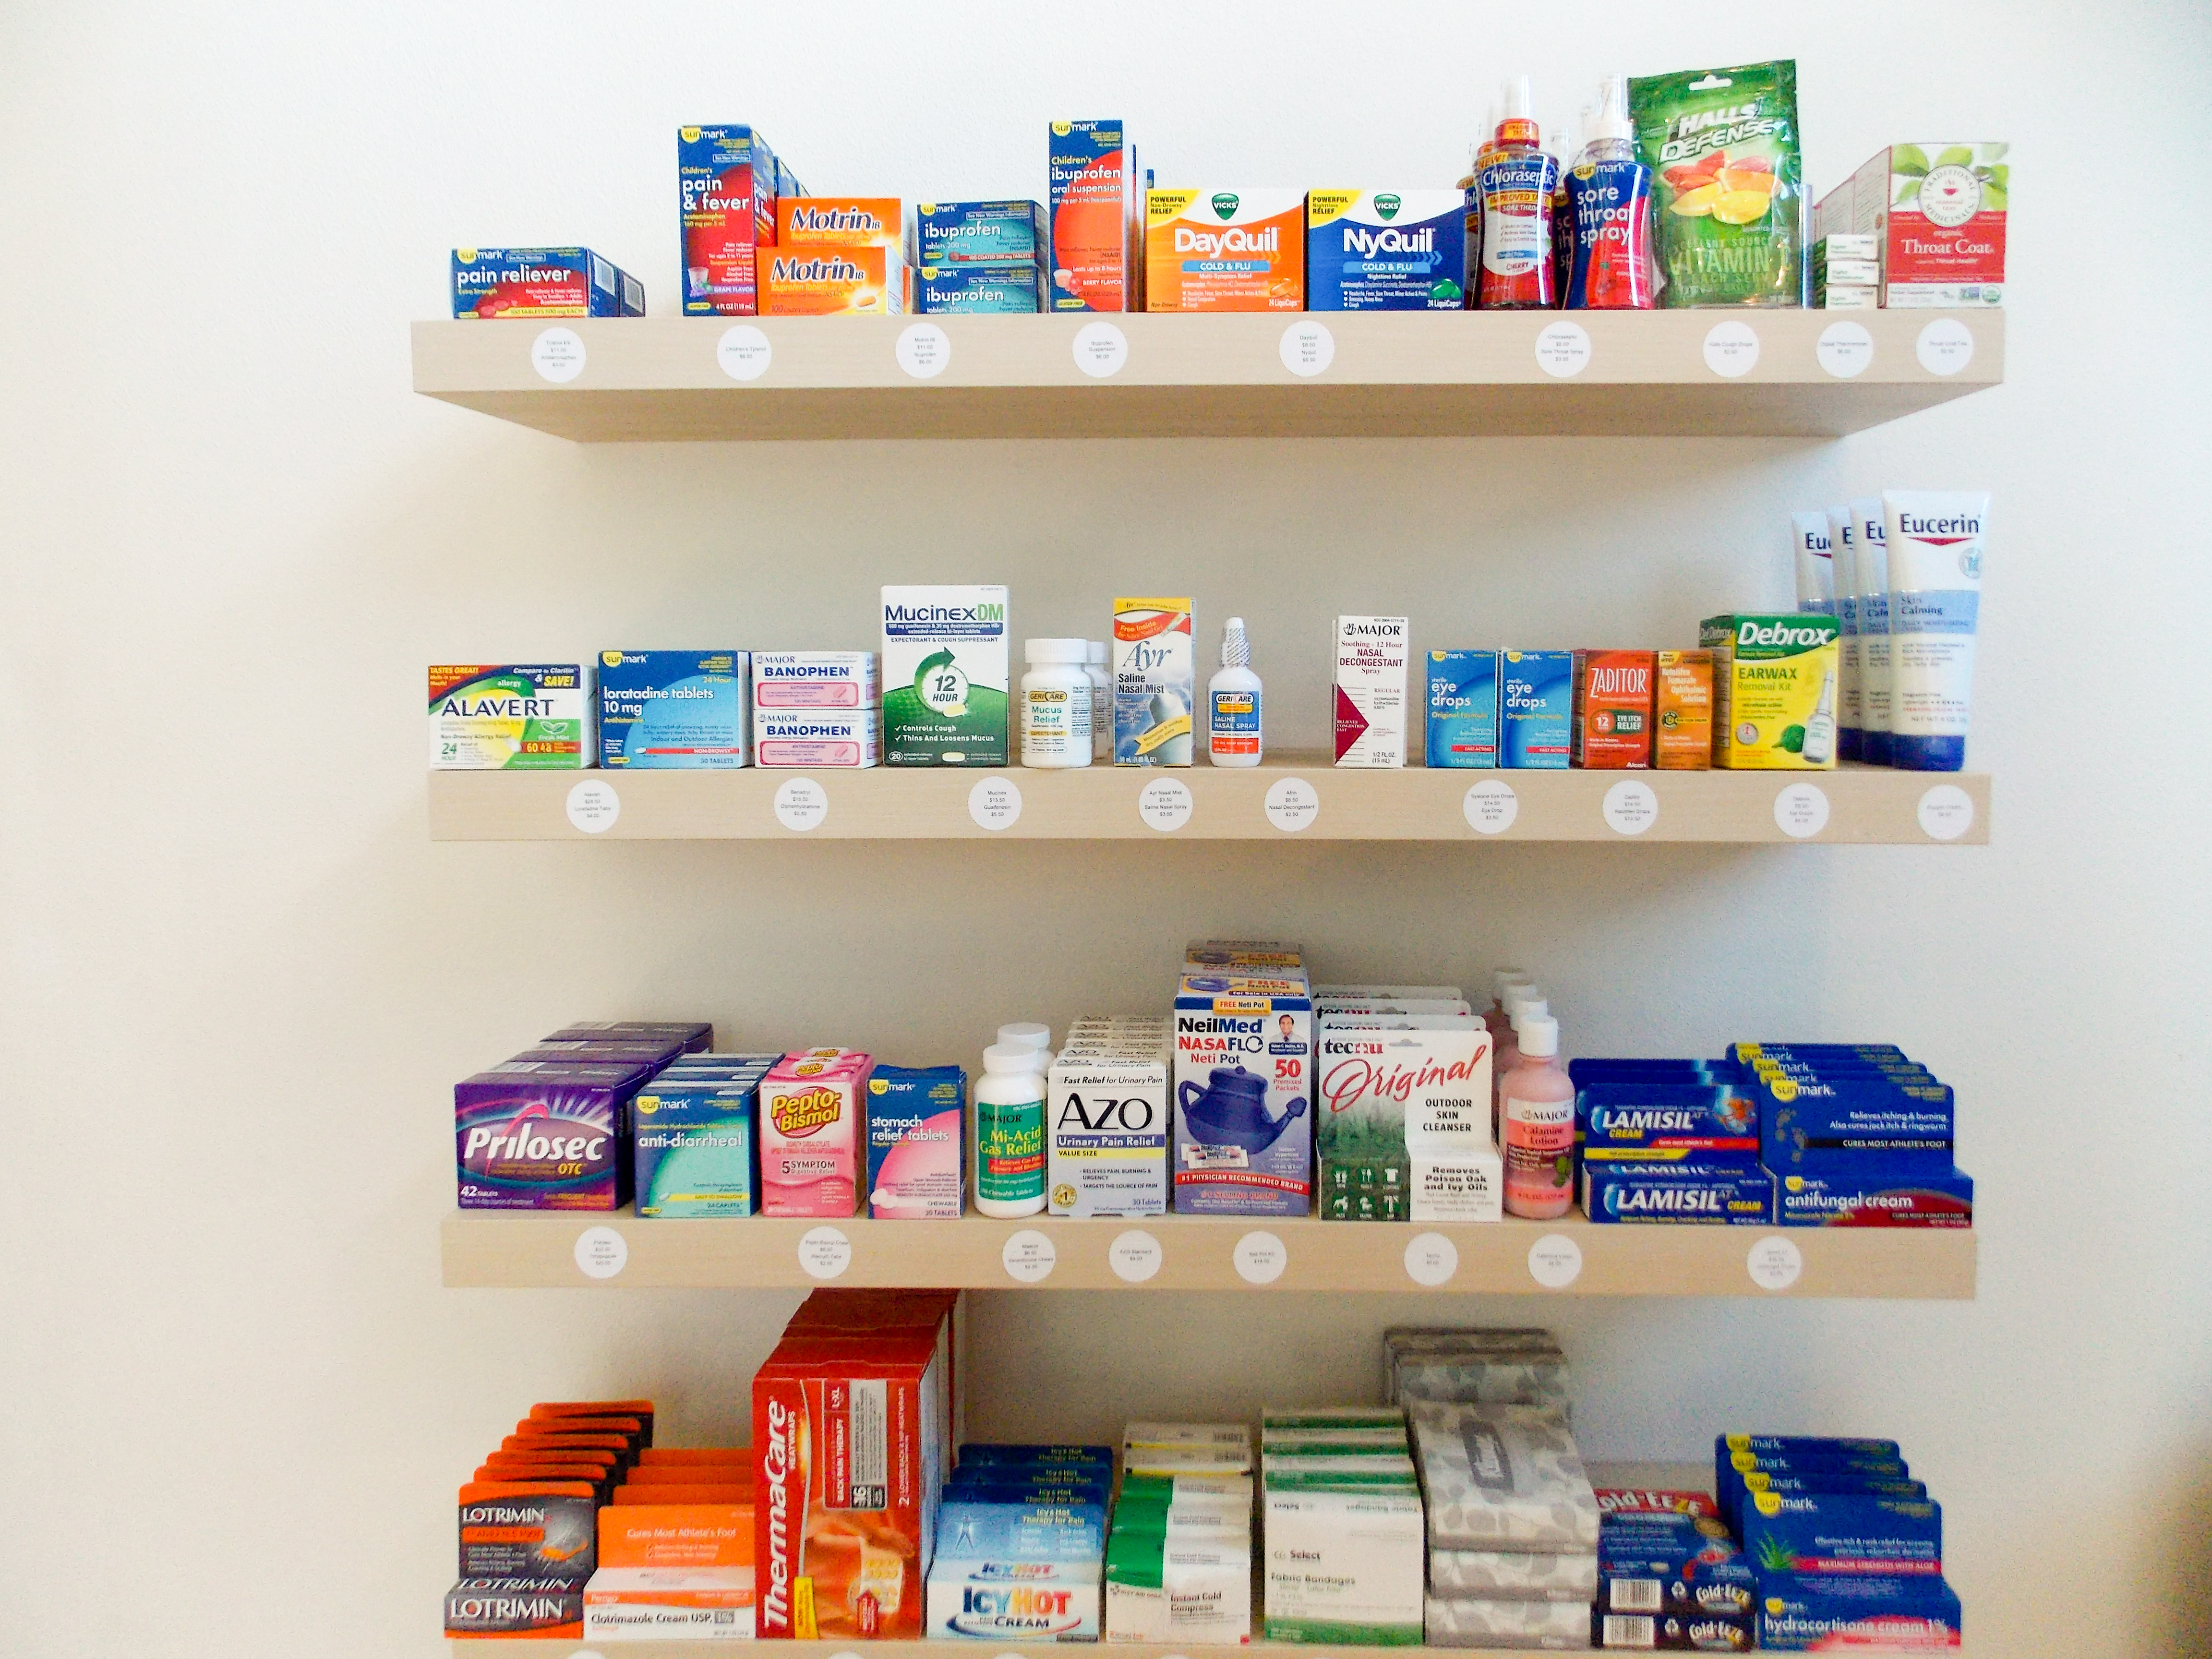 This Zoom+ clinic includes shelves of over-the-counter medication. One patient calls Zoom “one-stop shopping” because she can see her medical provider and get her medications in one place, usually within 30 minutes. The company is trying to buck the traditional health care system by offering convenient, affordable care and making the experience hip and user-friendly.